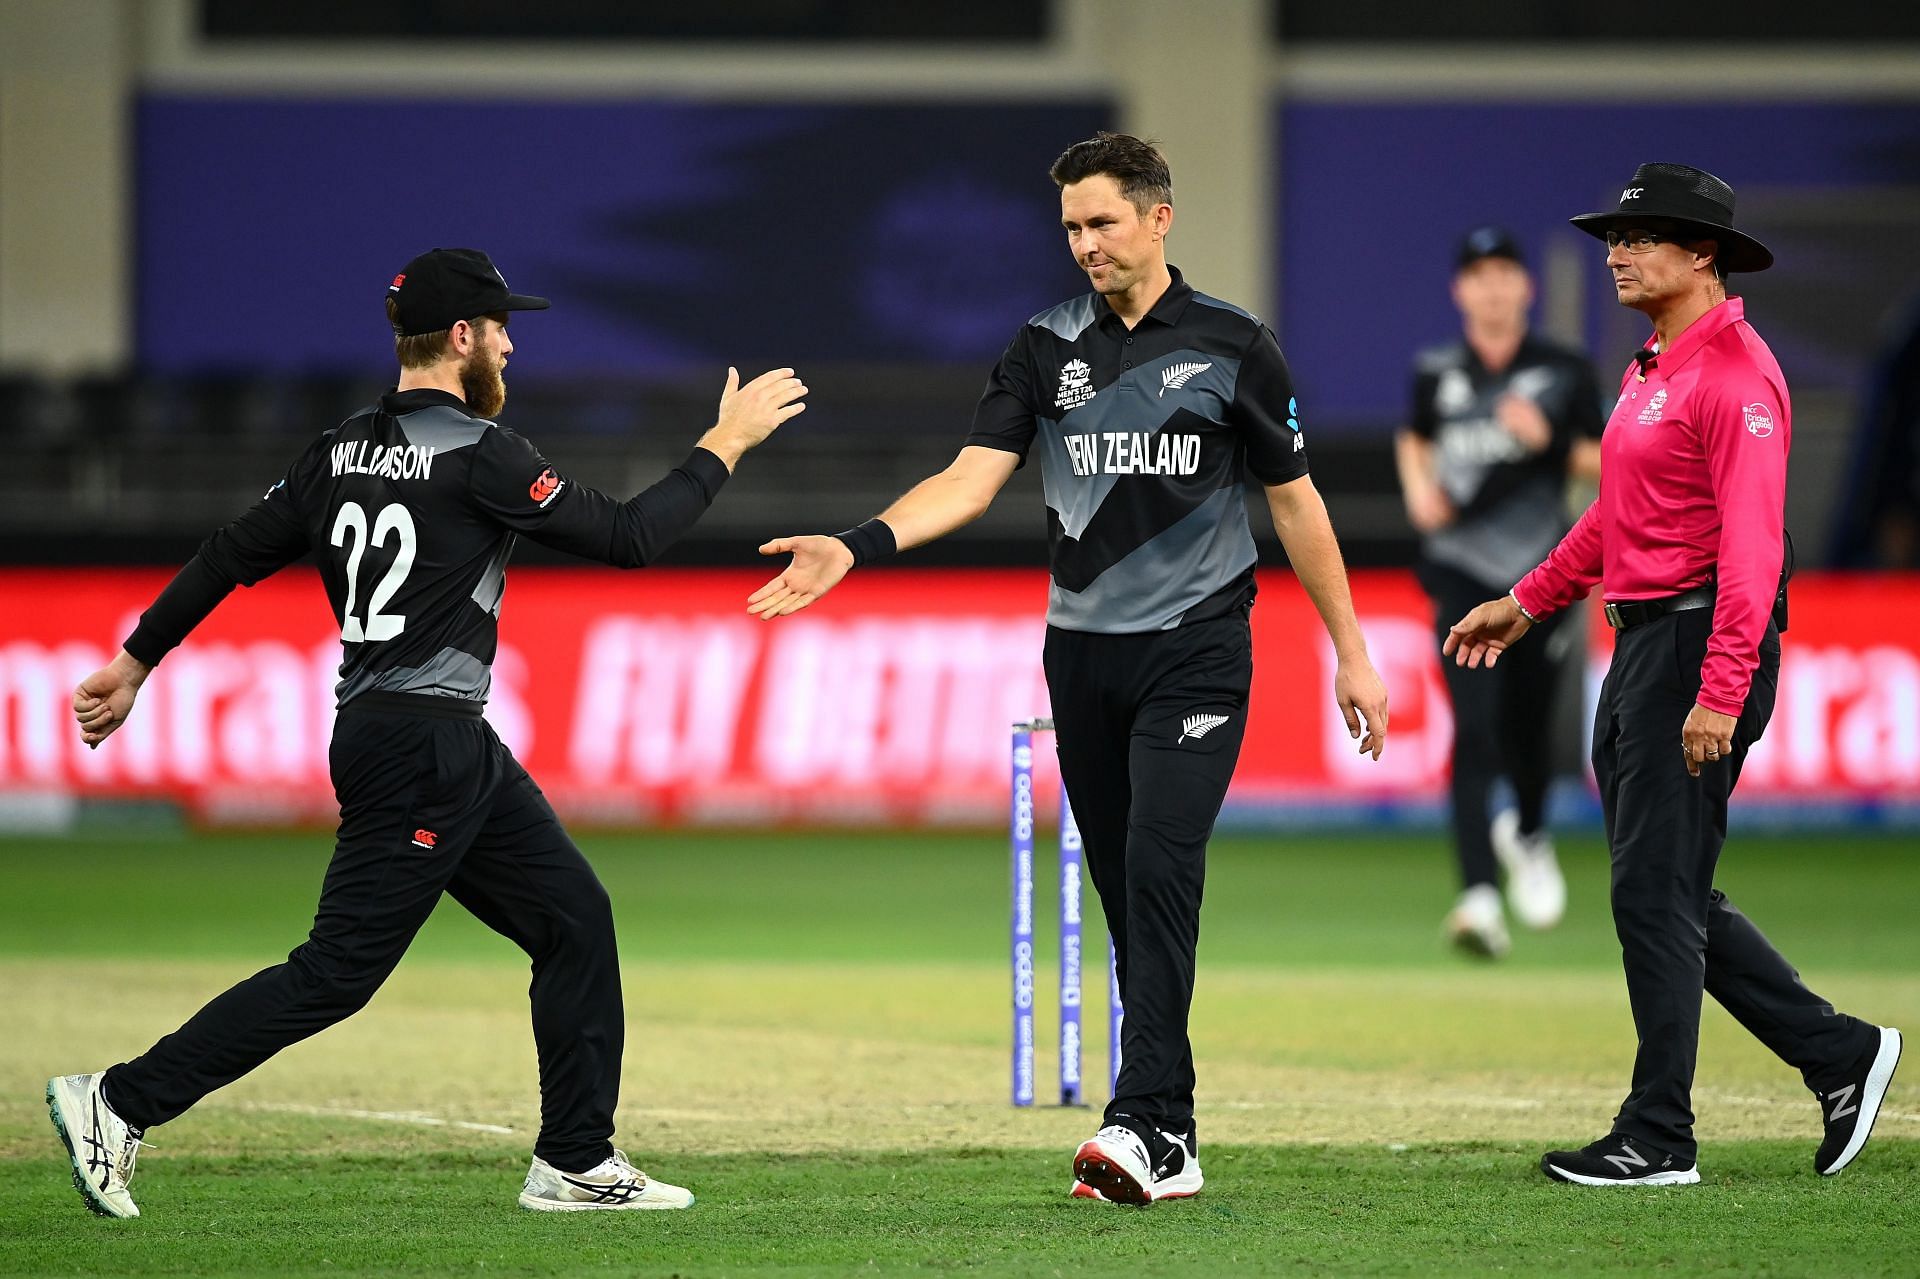 New Zealand will aim to continue their winning momentum in the ICC T20 World Cup 2021